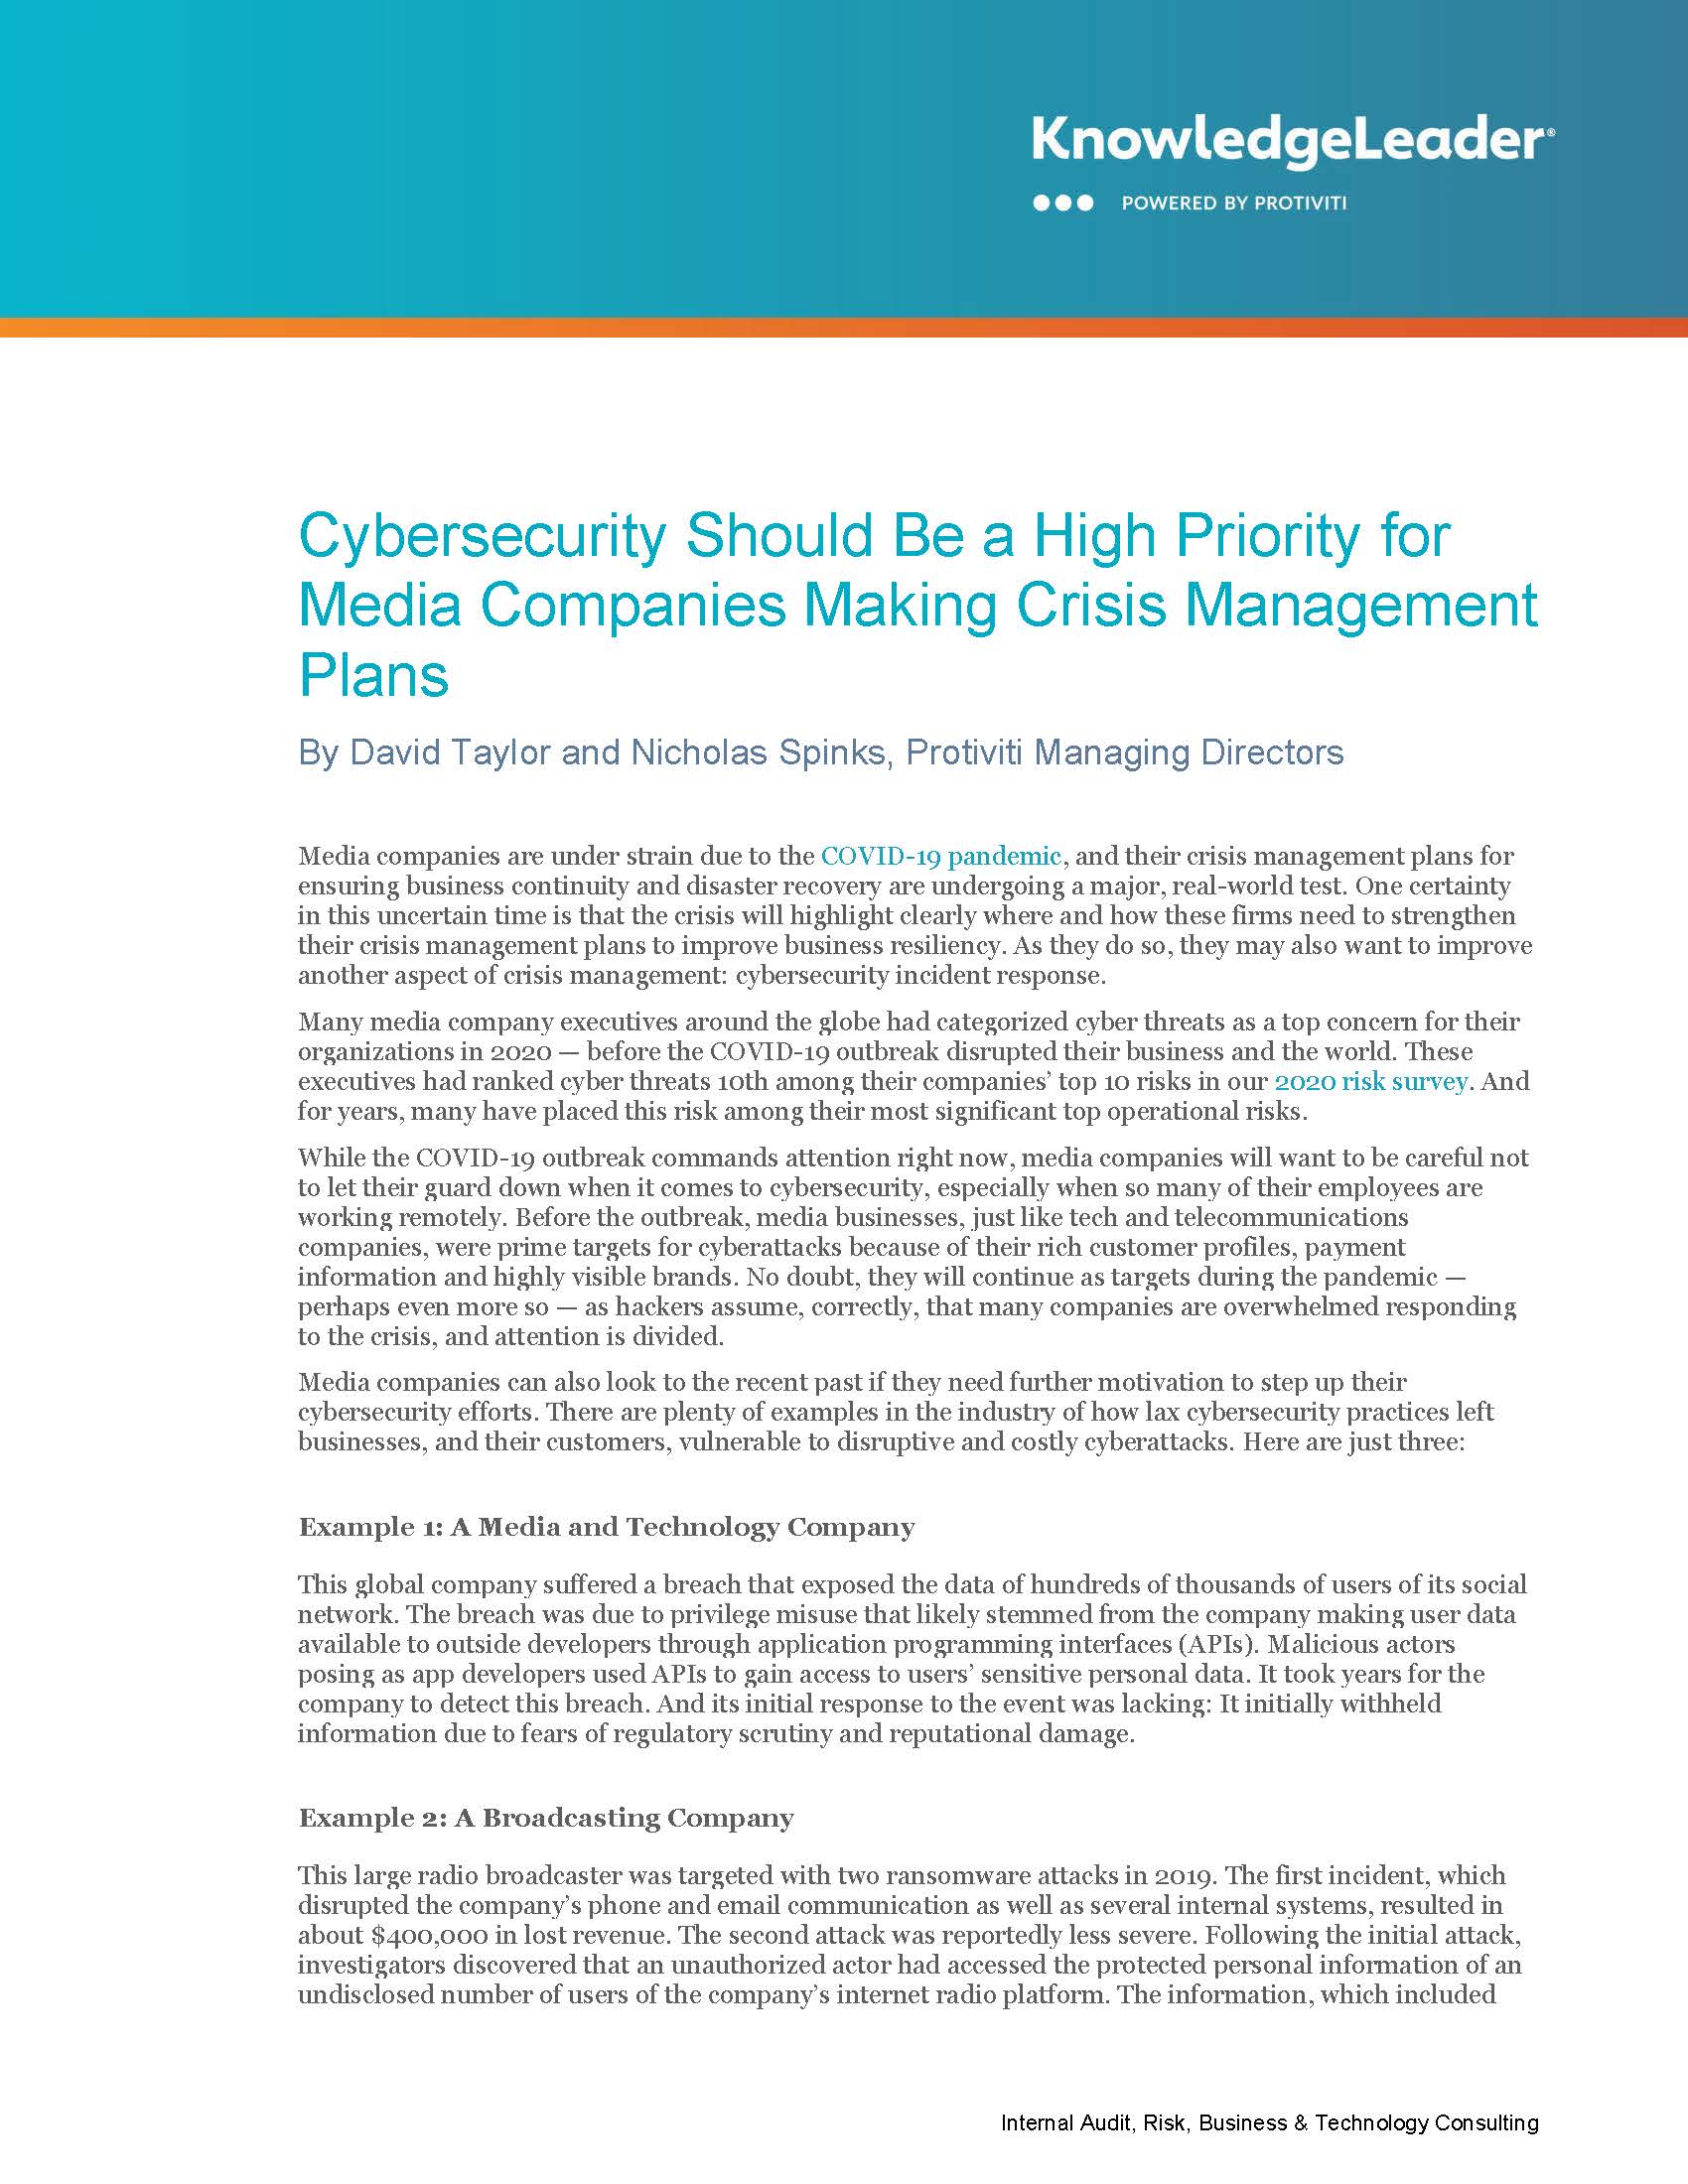 Screenshot of the first page of Cybersecurity Should Be a High Priority for Media Companies Making Crisis Management Plans